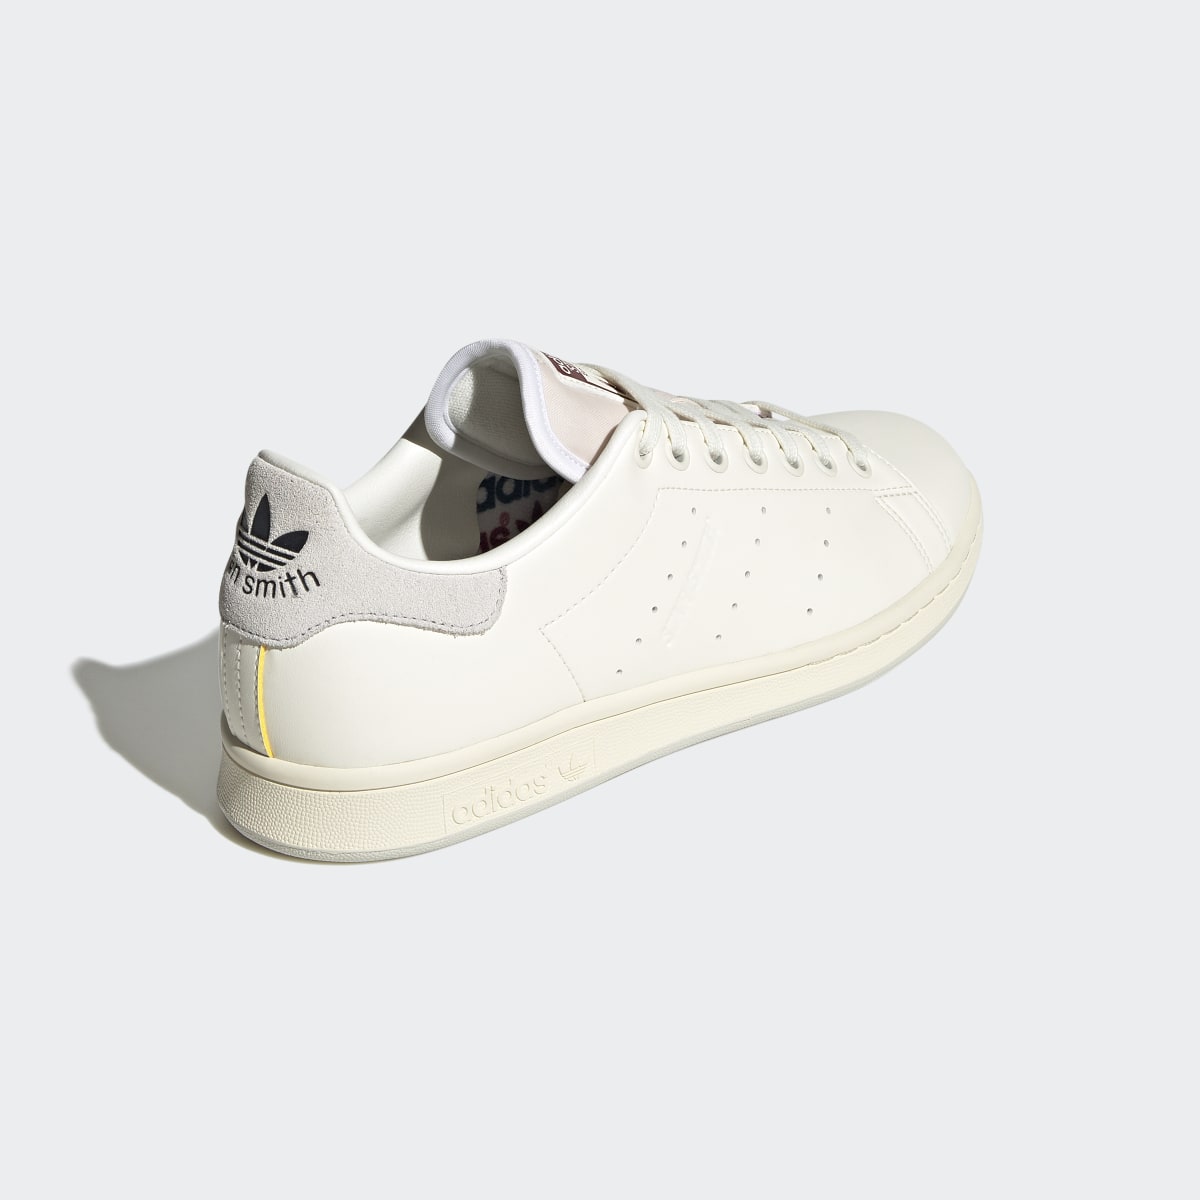 Adidas Stanniversary Stan Smith Shoes. 11